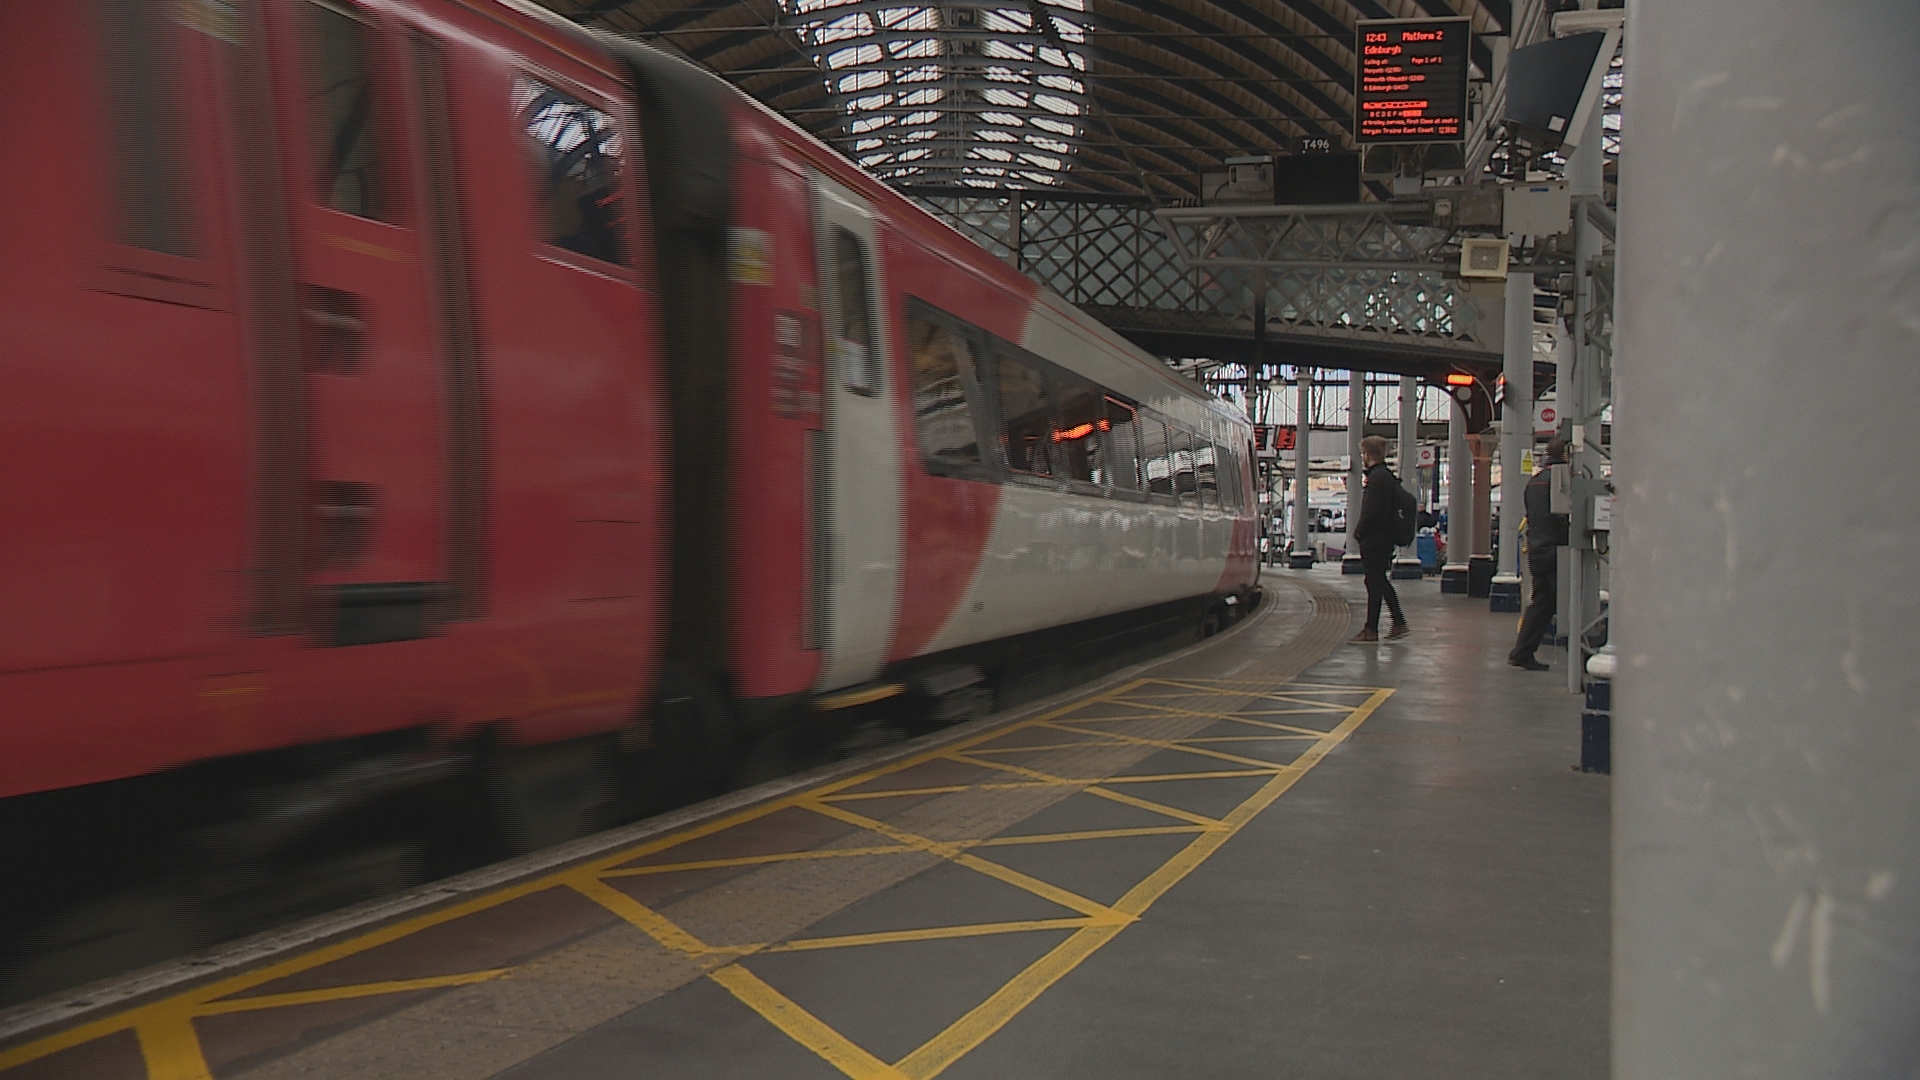 train travel disruption this weekend